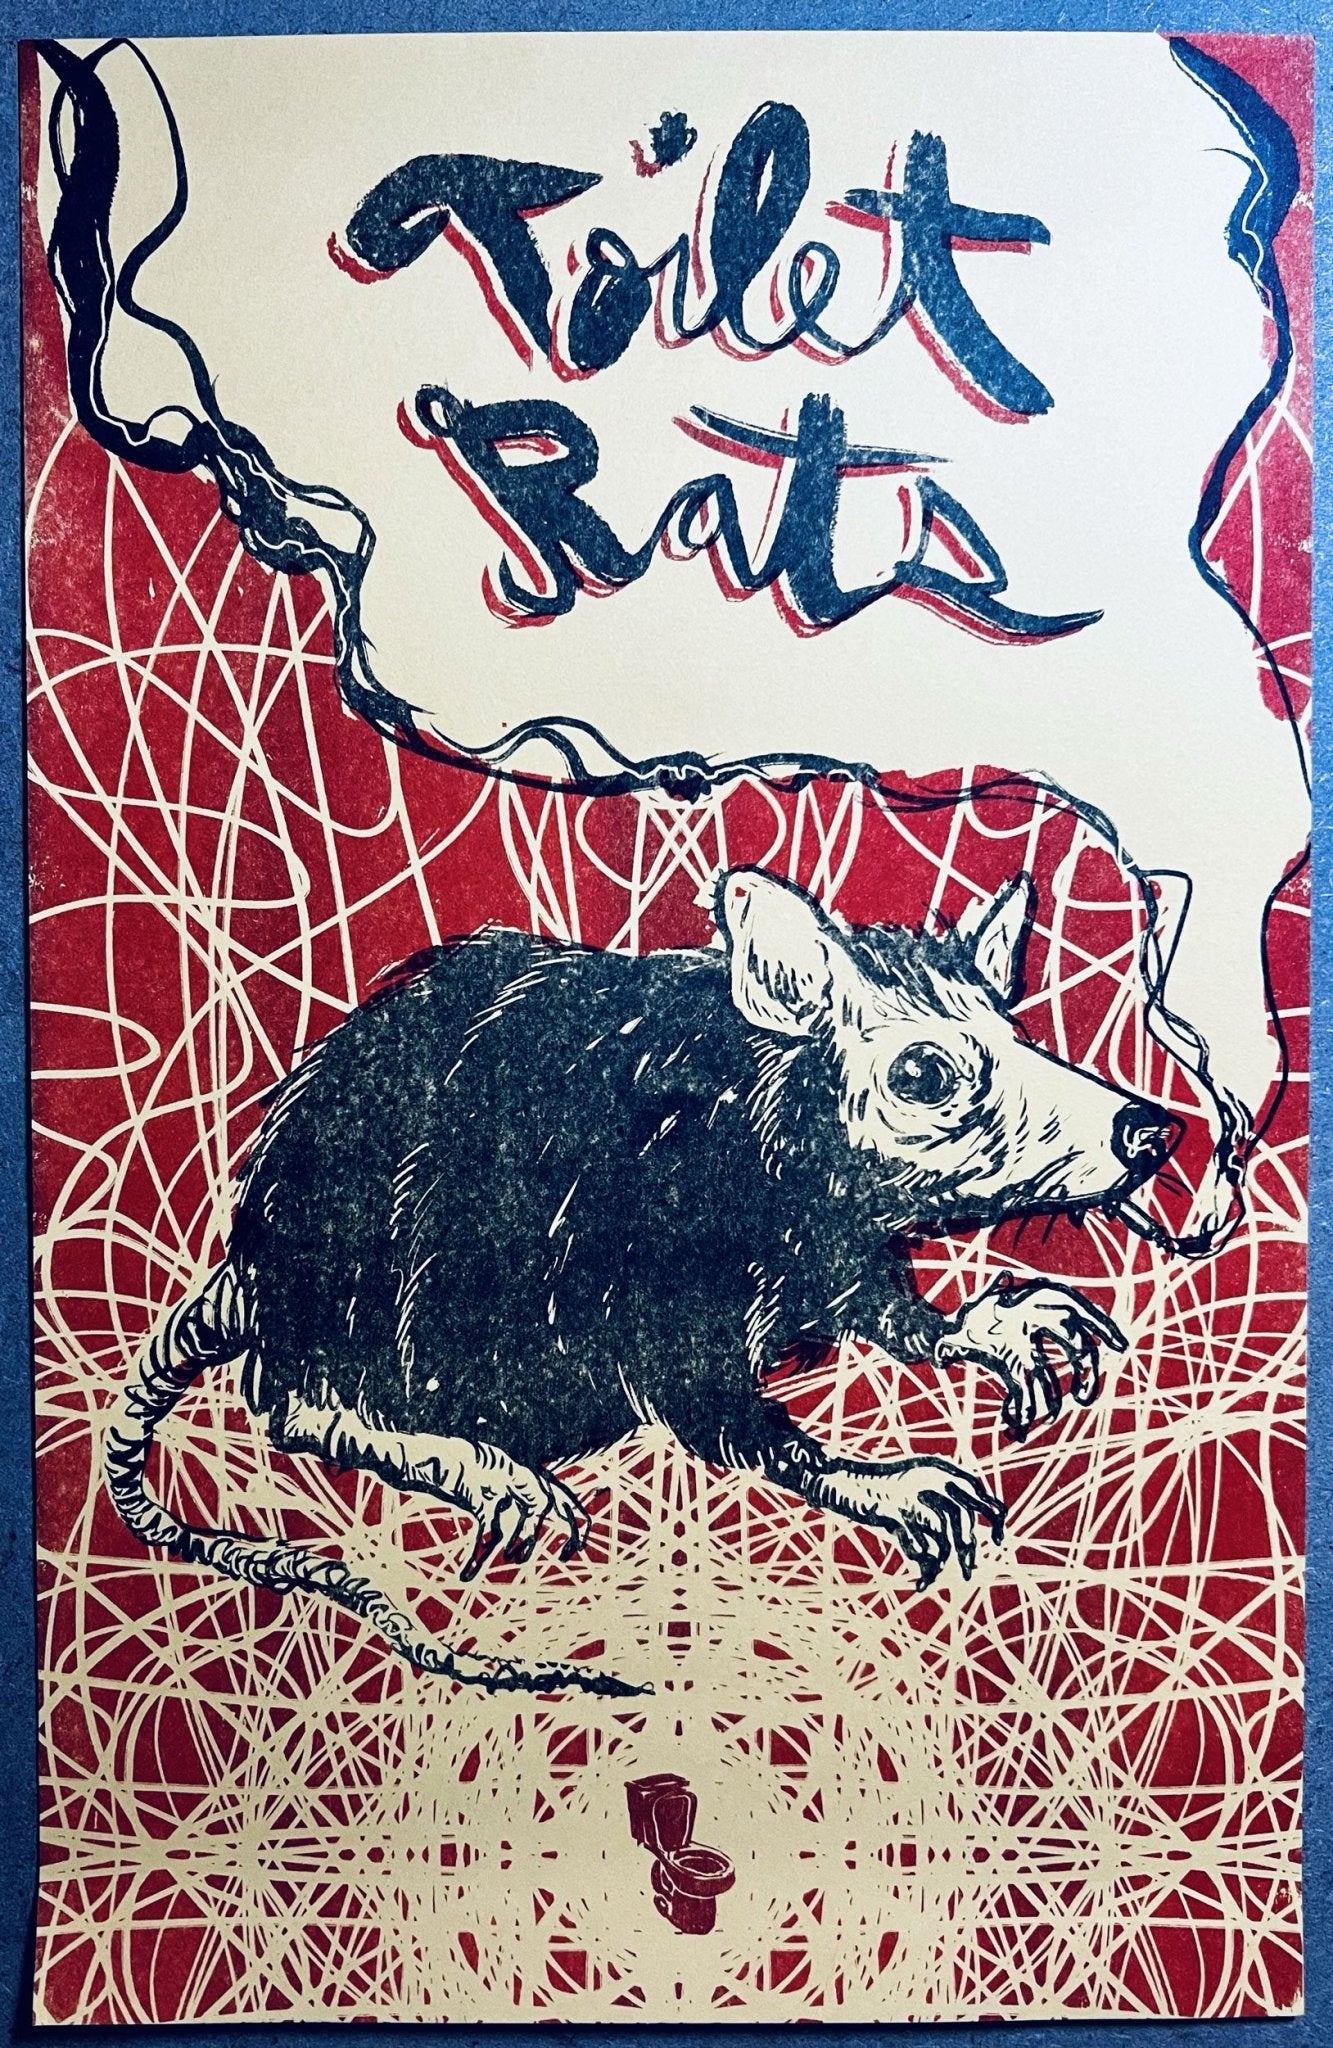 Toilet Rats Screen Printed Poster - Steadfast Records